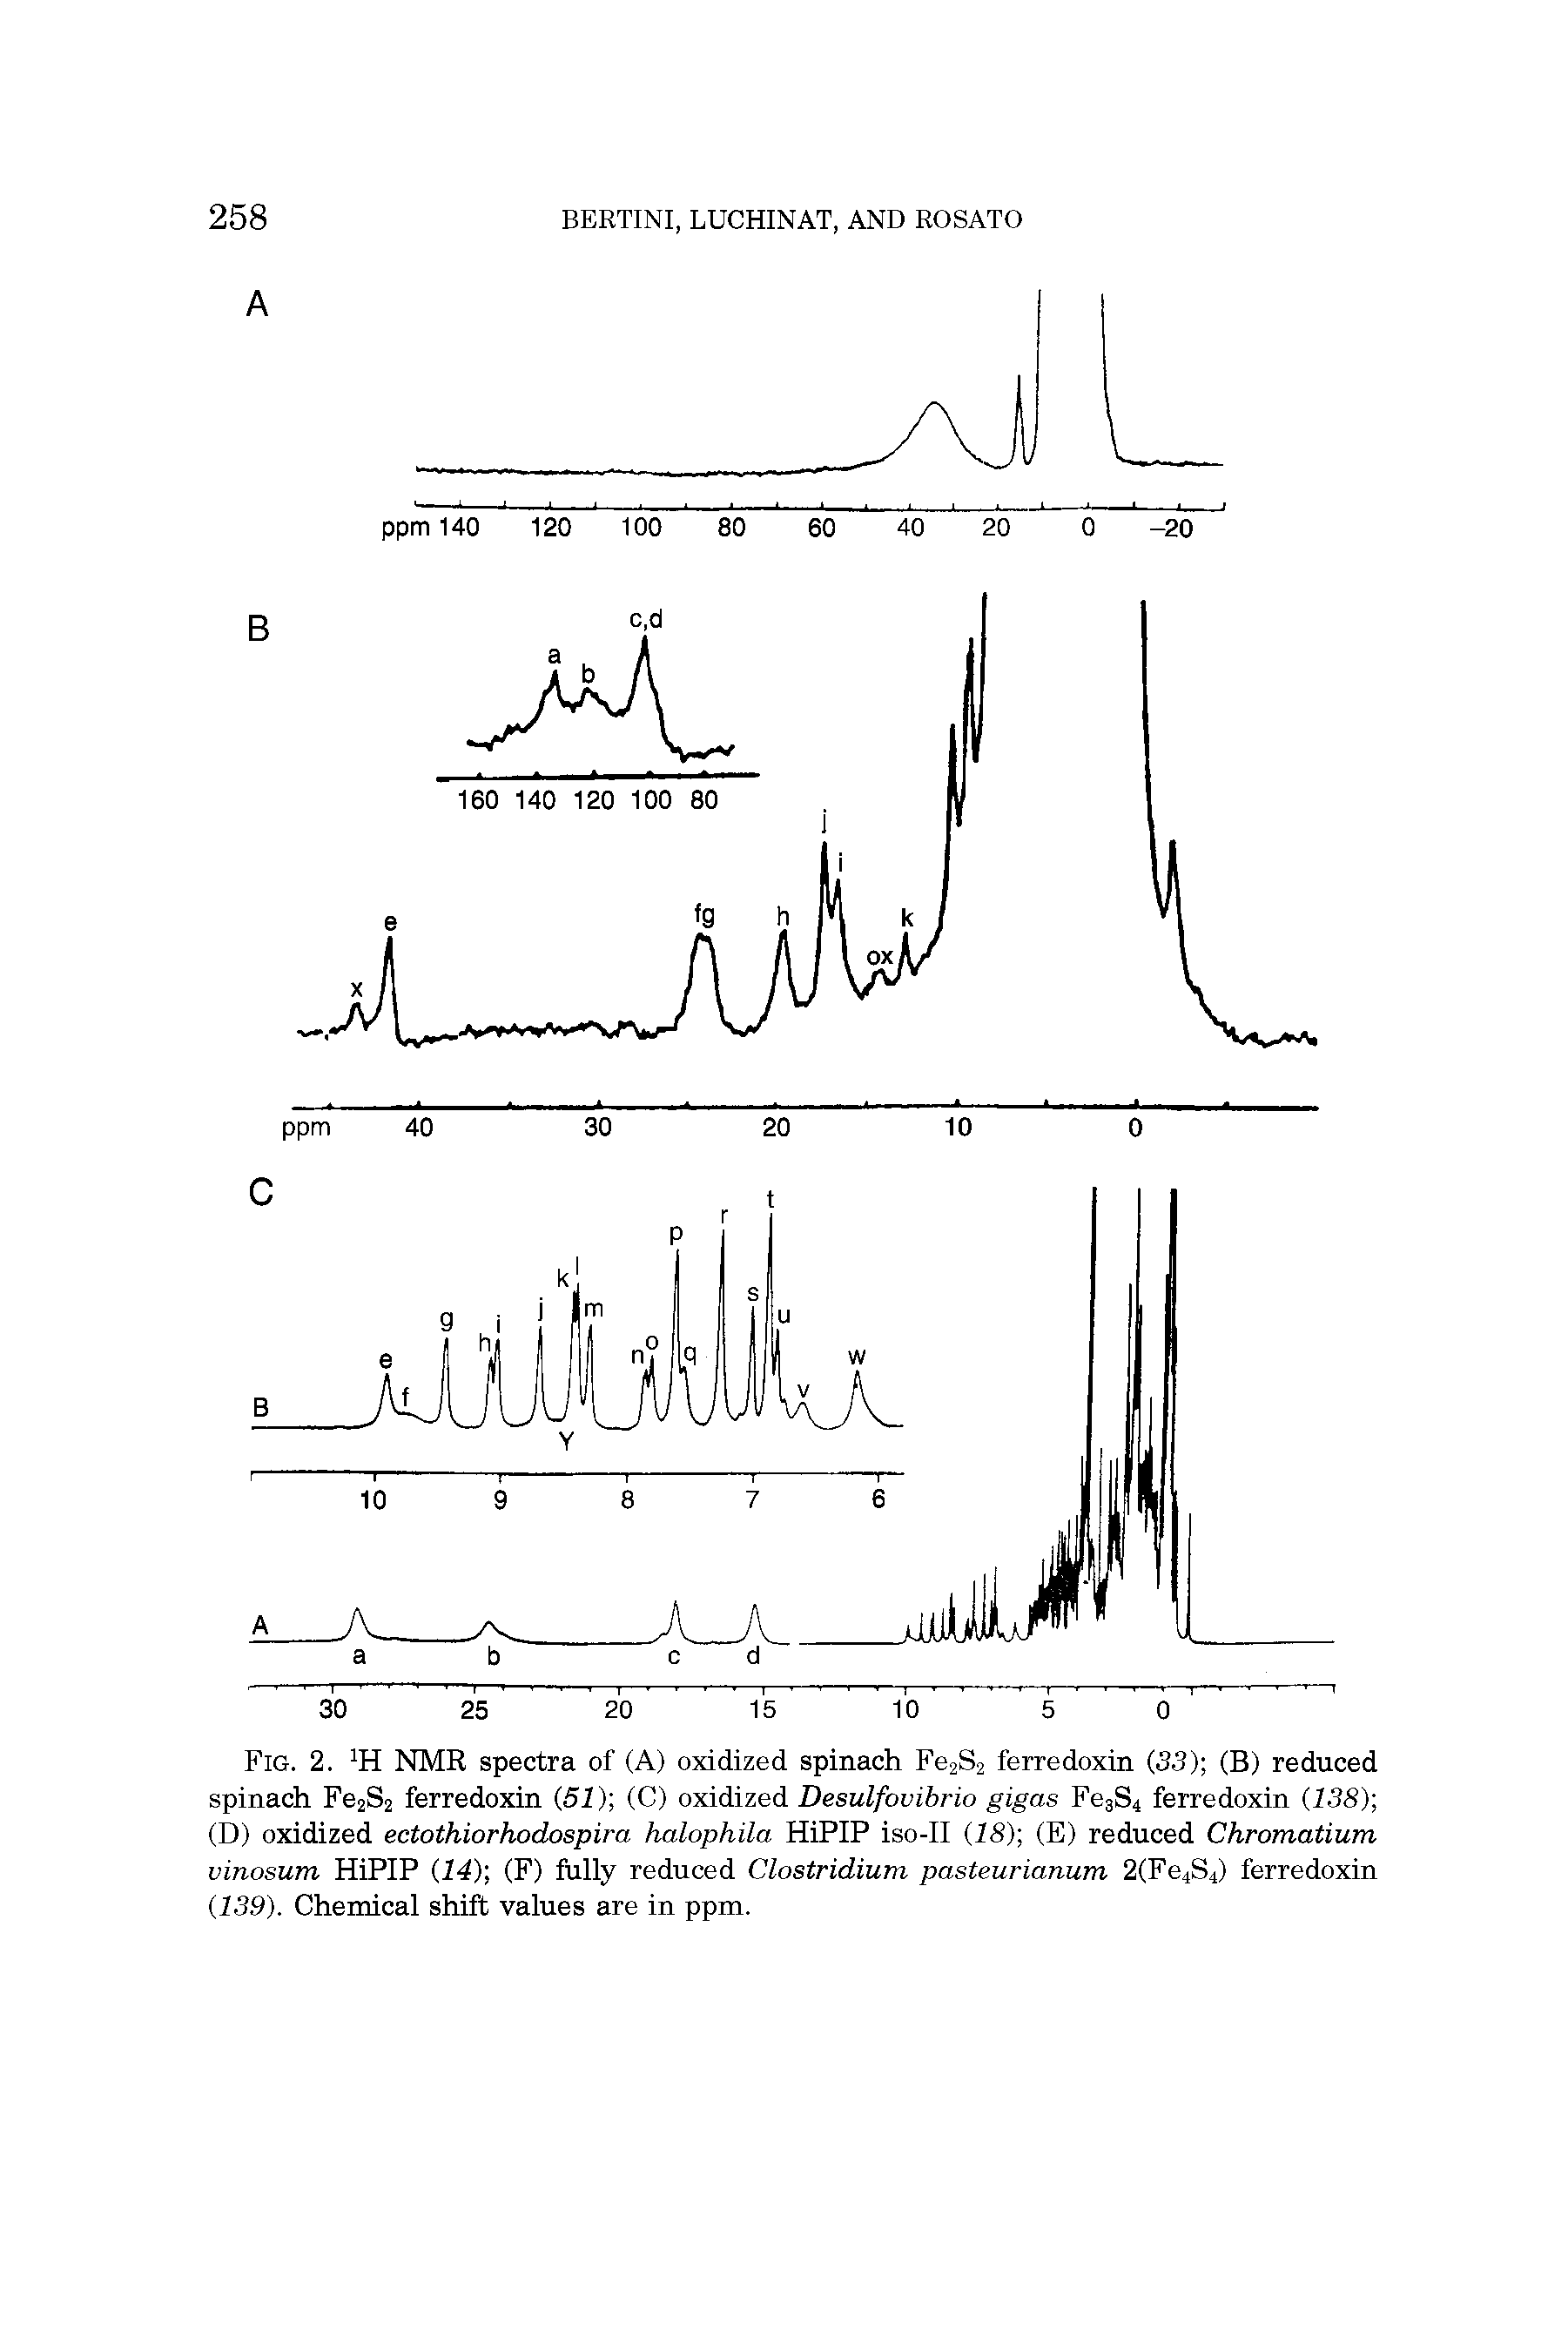 Fig. 2. H NMR spectra of (A) oxidized spinach Fe2S2 ferredoxin (33) (B) reduced spinach Fe2S2 ferredoxin (5f) (C) oxidized Desulfovibrio gigas Fe3S4 ferredoxin (138) (D) oxidized ectothiorhodospira halophila HiPIP iso-II (23) (E) reduced Chromatium vinosum HiPIP (14) (F) fully reduced Clostridium pasteurianum 2(Fe4S4) ferredoxin (139). Chemical shift values are in ppm.